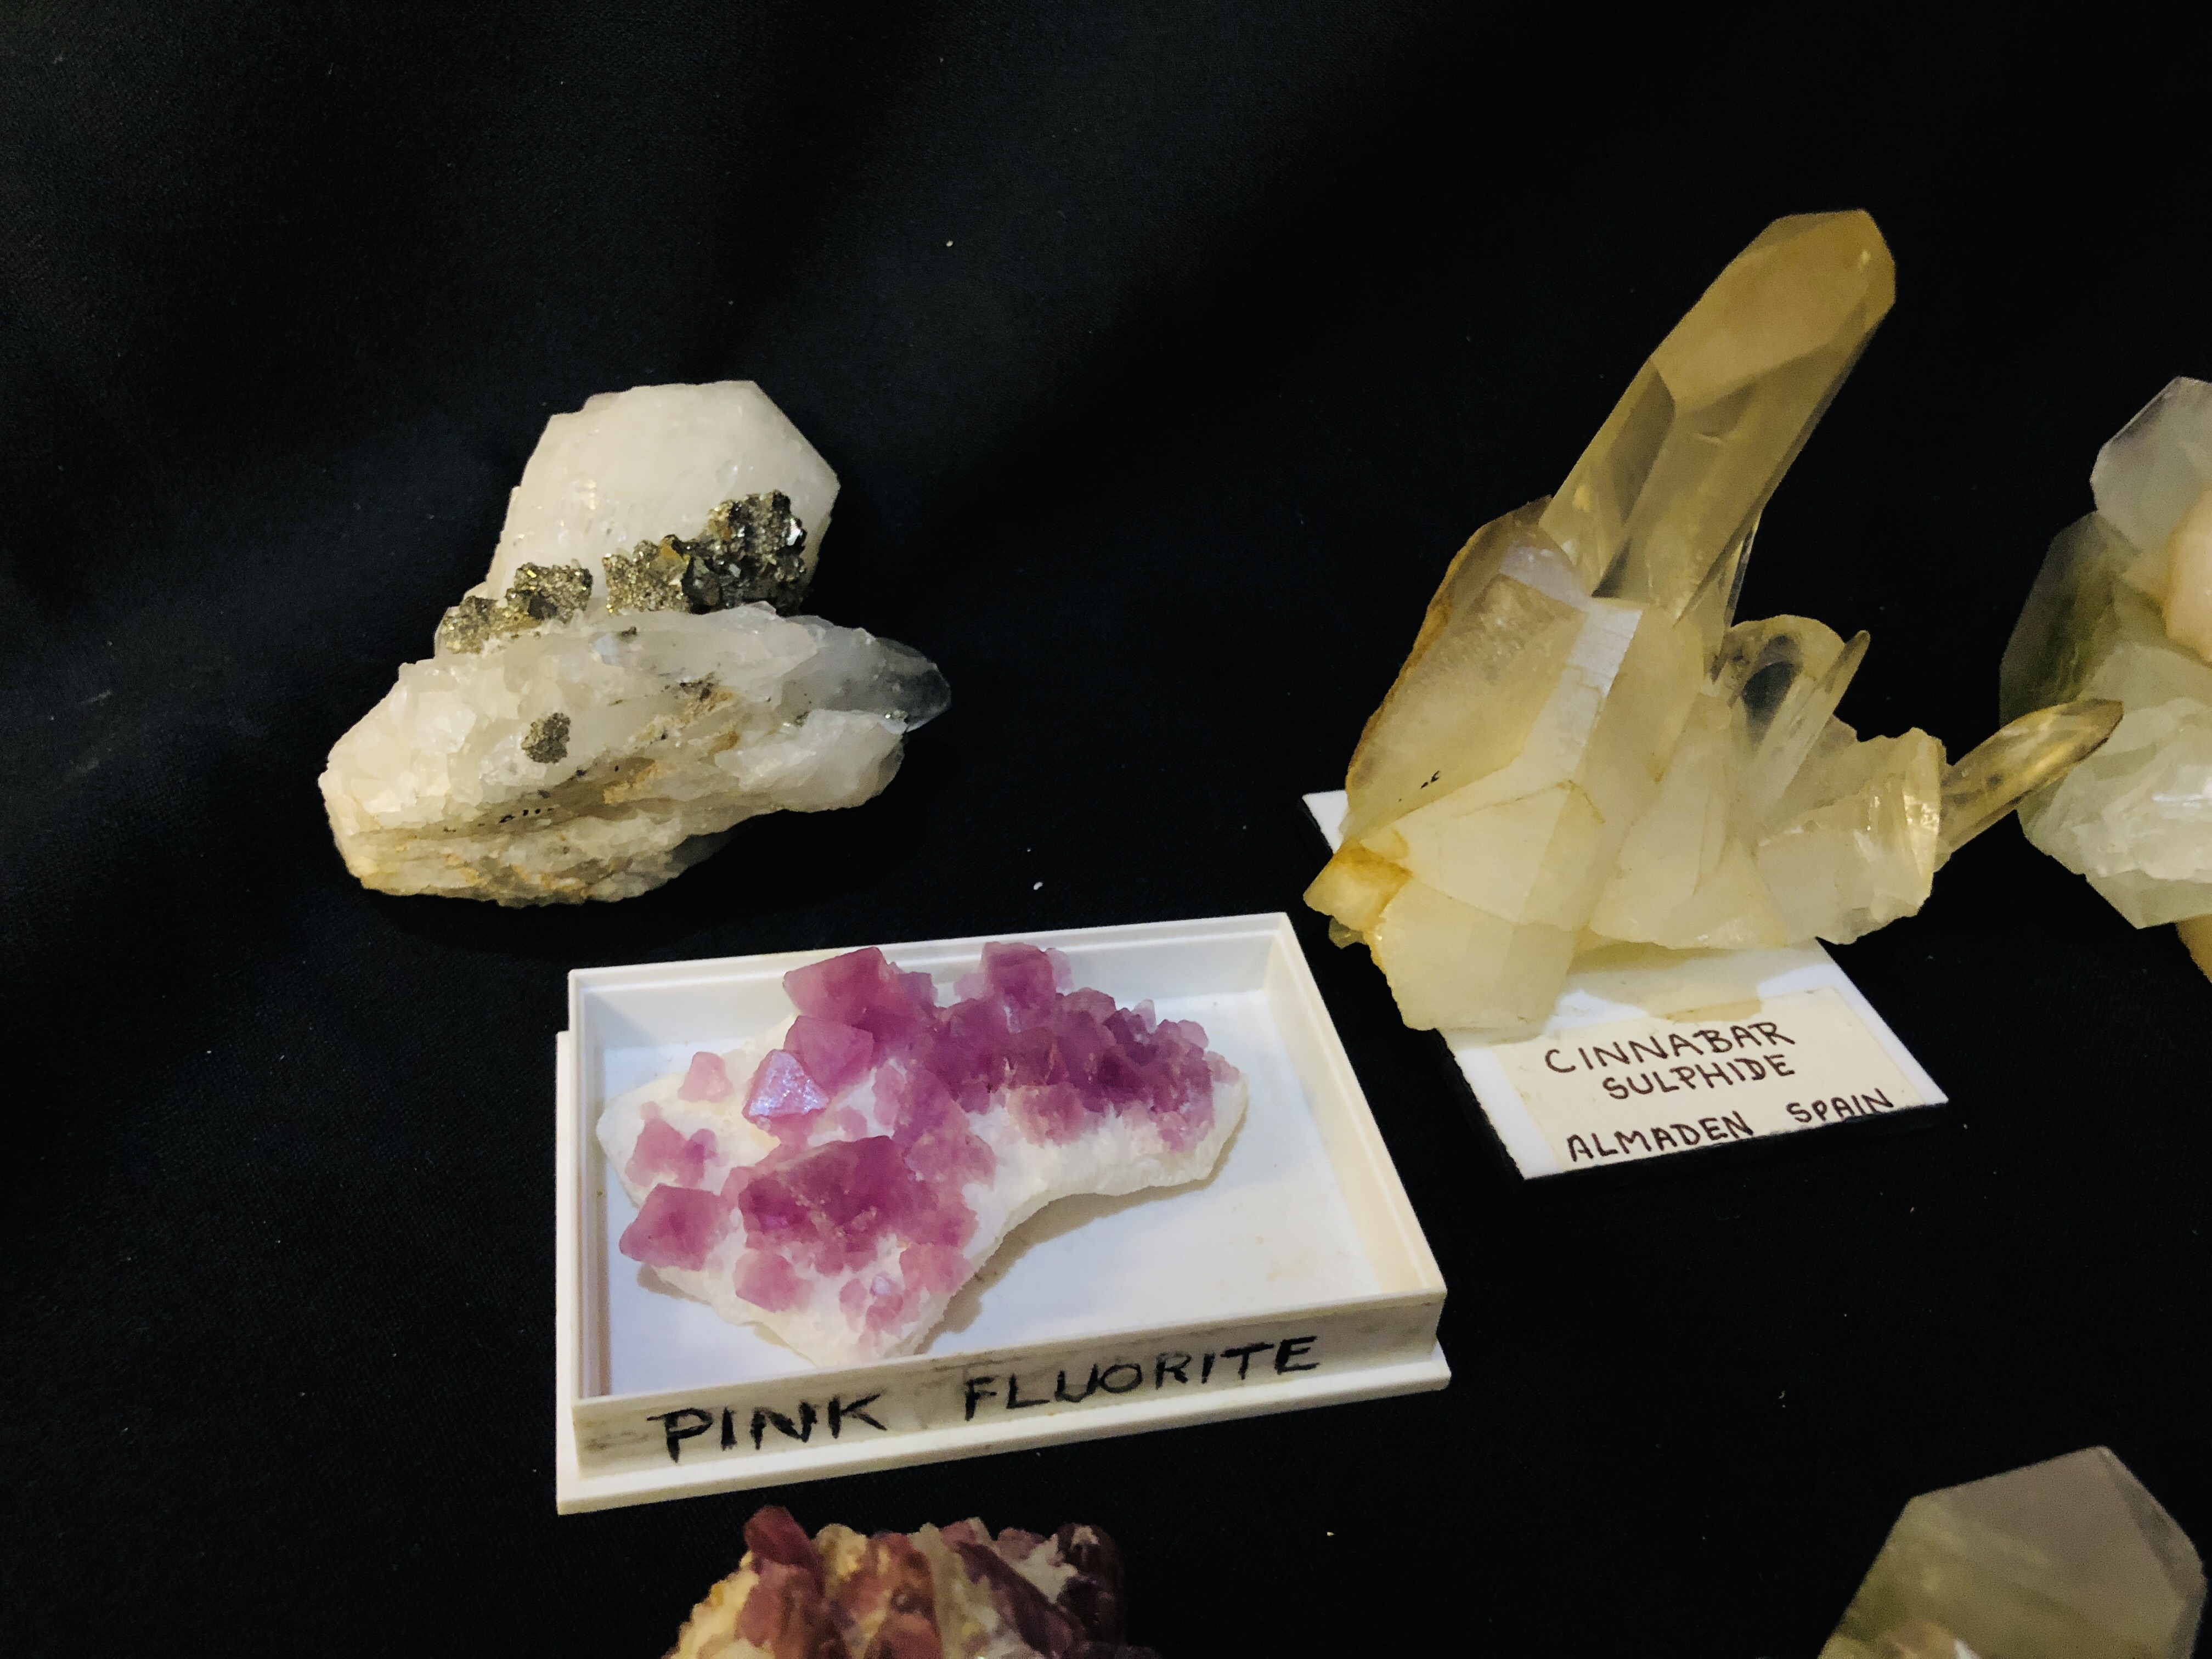 A COLLECTION OF APPROX 7 CRYSTAL AND MINERAL ROCK EXAMPLES TO INCLUDE CINNABAR SULPHIDE, - Image 3 of 4